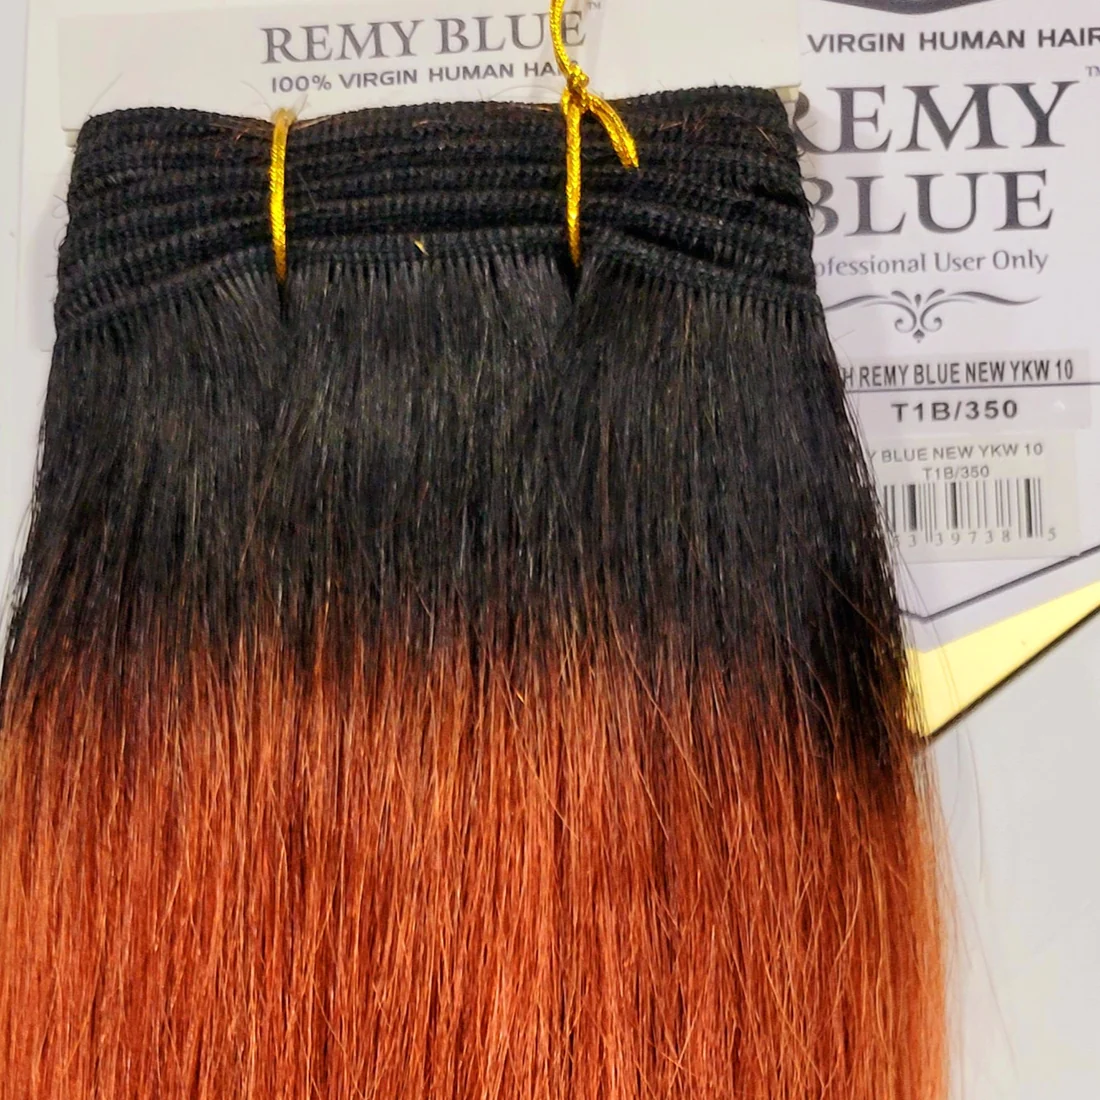 Remy Blue Human Hair New Yaky 12"